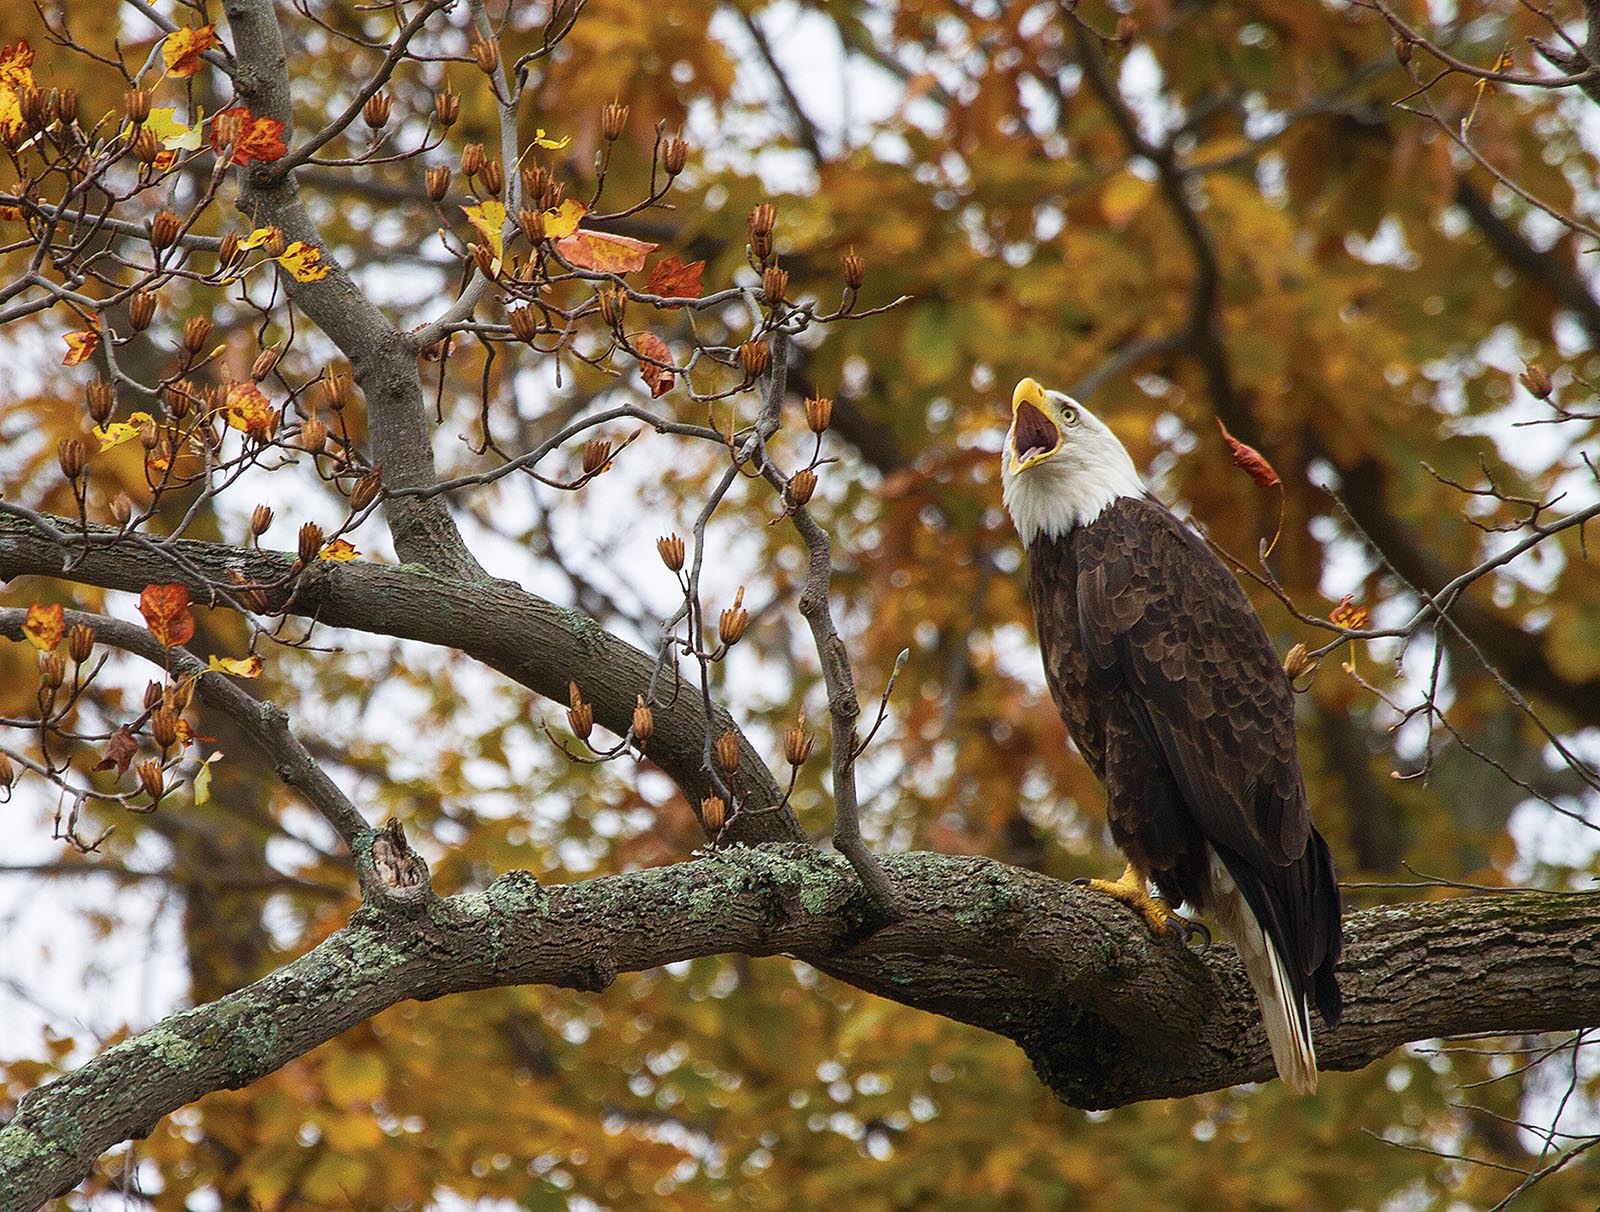 An image of a bald eagle in a tree